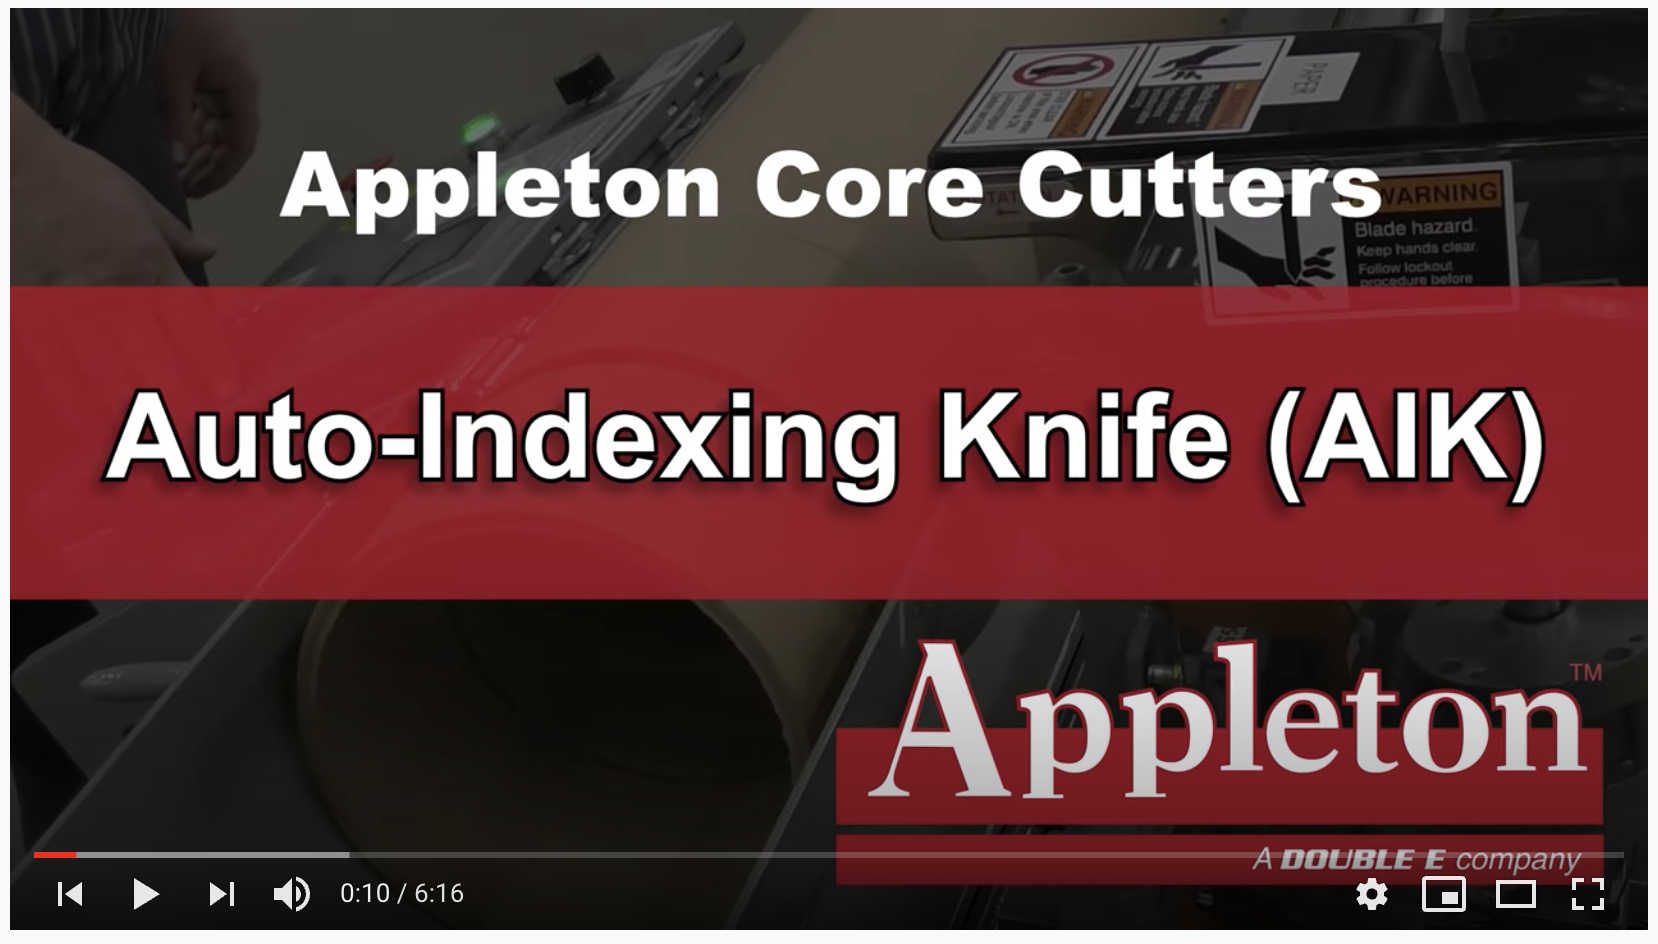 Auto Indexing Knife - Appleton Core Cutters